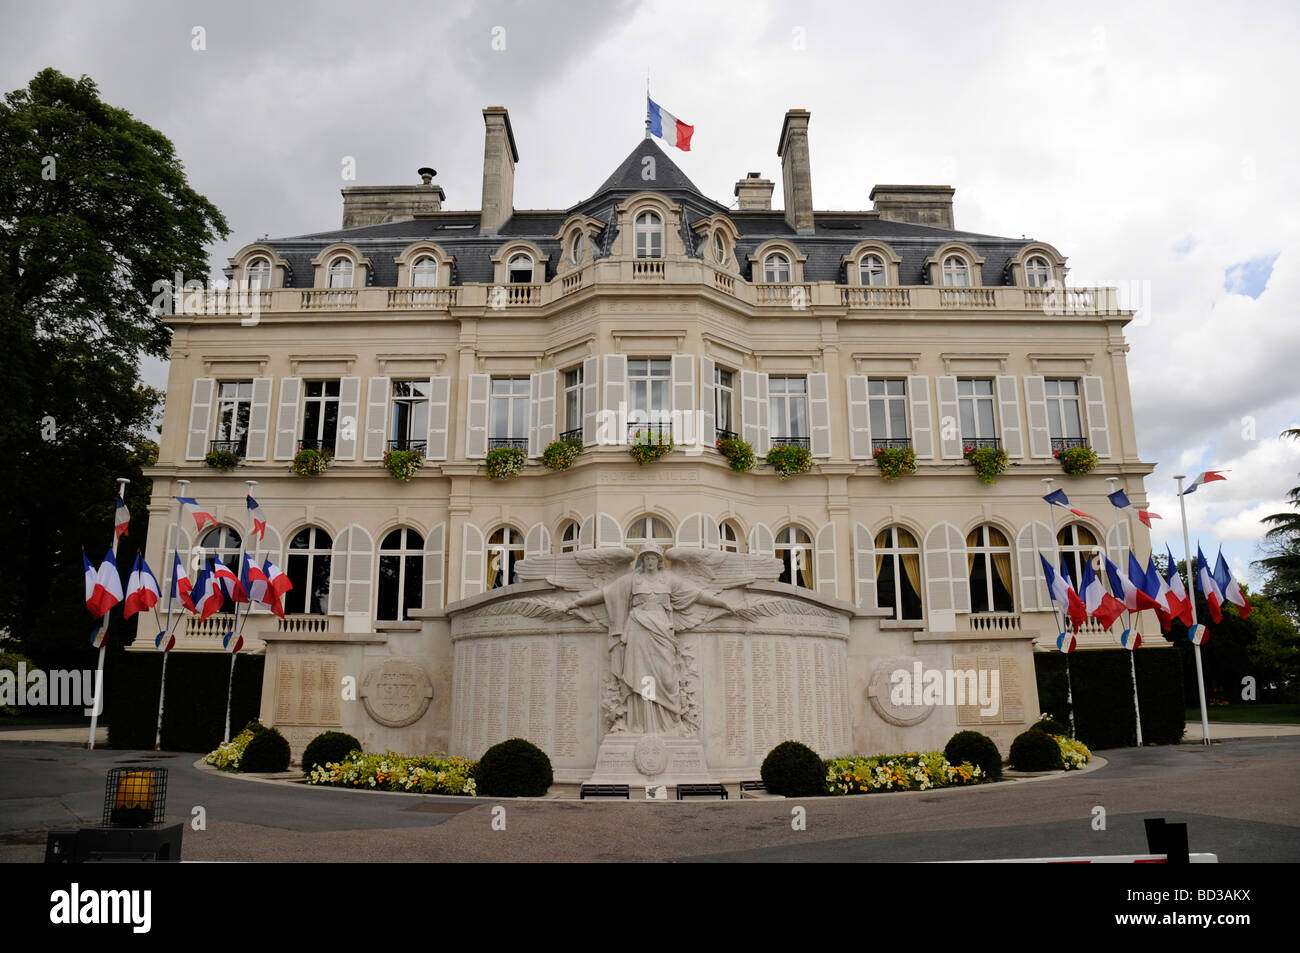 The monument to the fallen in front of the Epernay Hôtel de Ville (town hall). France. Stock Photo